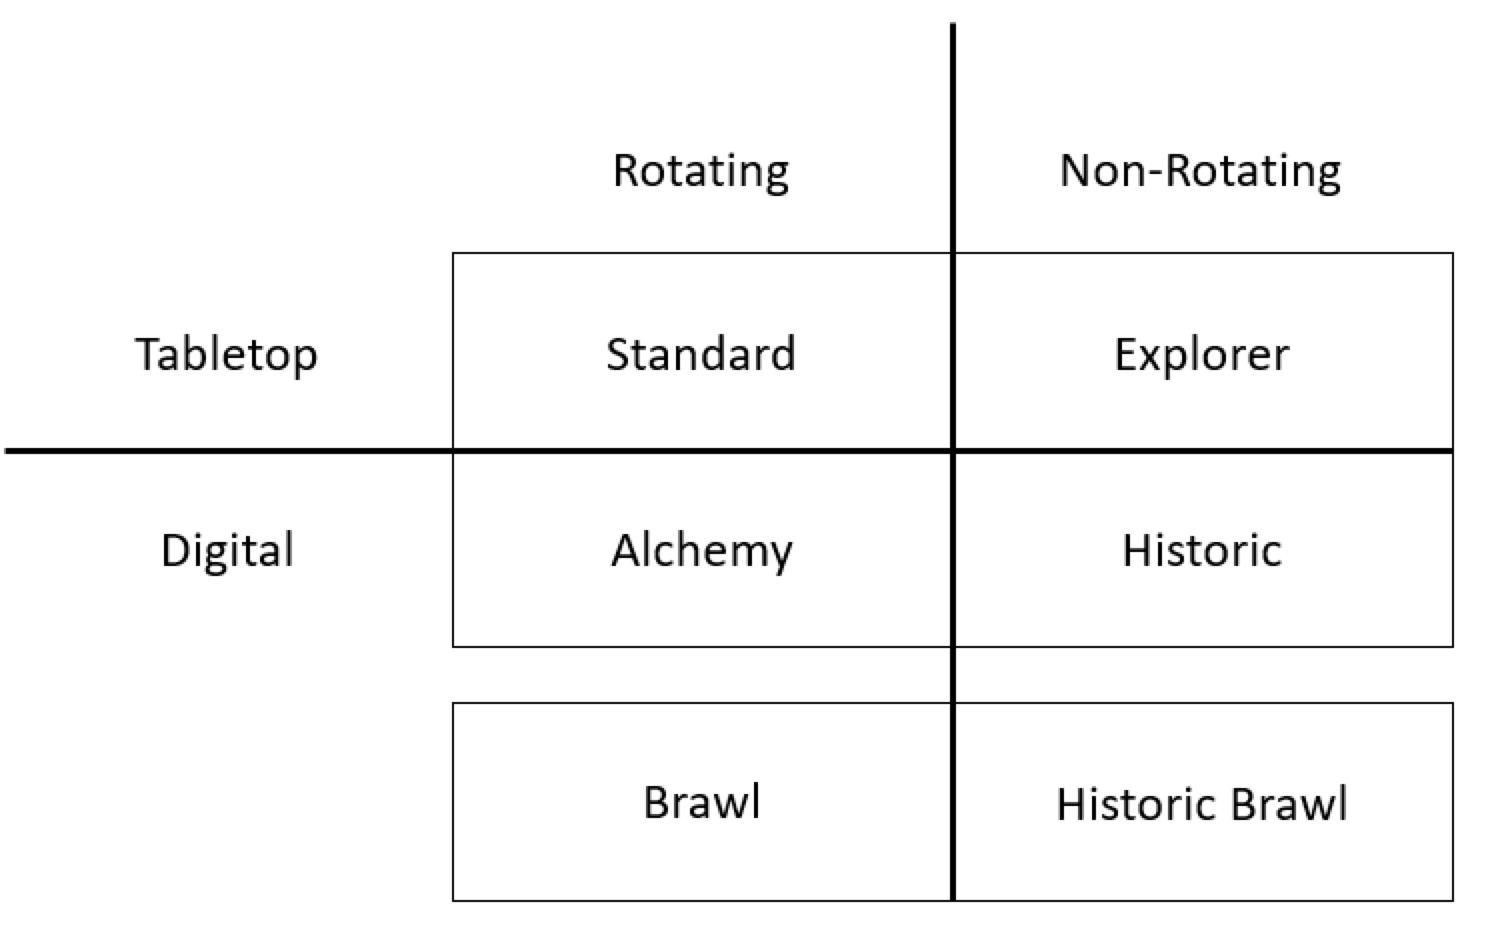 Chart showing tabletop and digital formats grouped into rotating (Standard, Alchemy, and Brawl) and nonrotating (Explorer, Historic, and Historic Brawl)